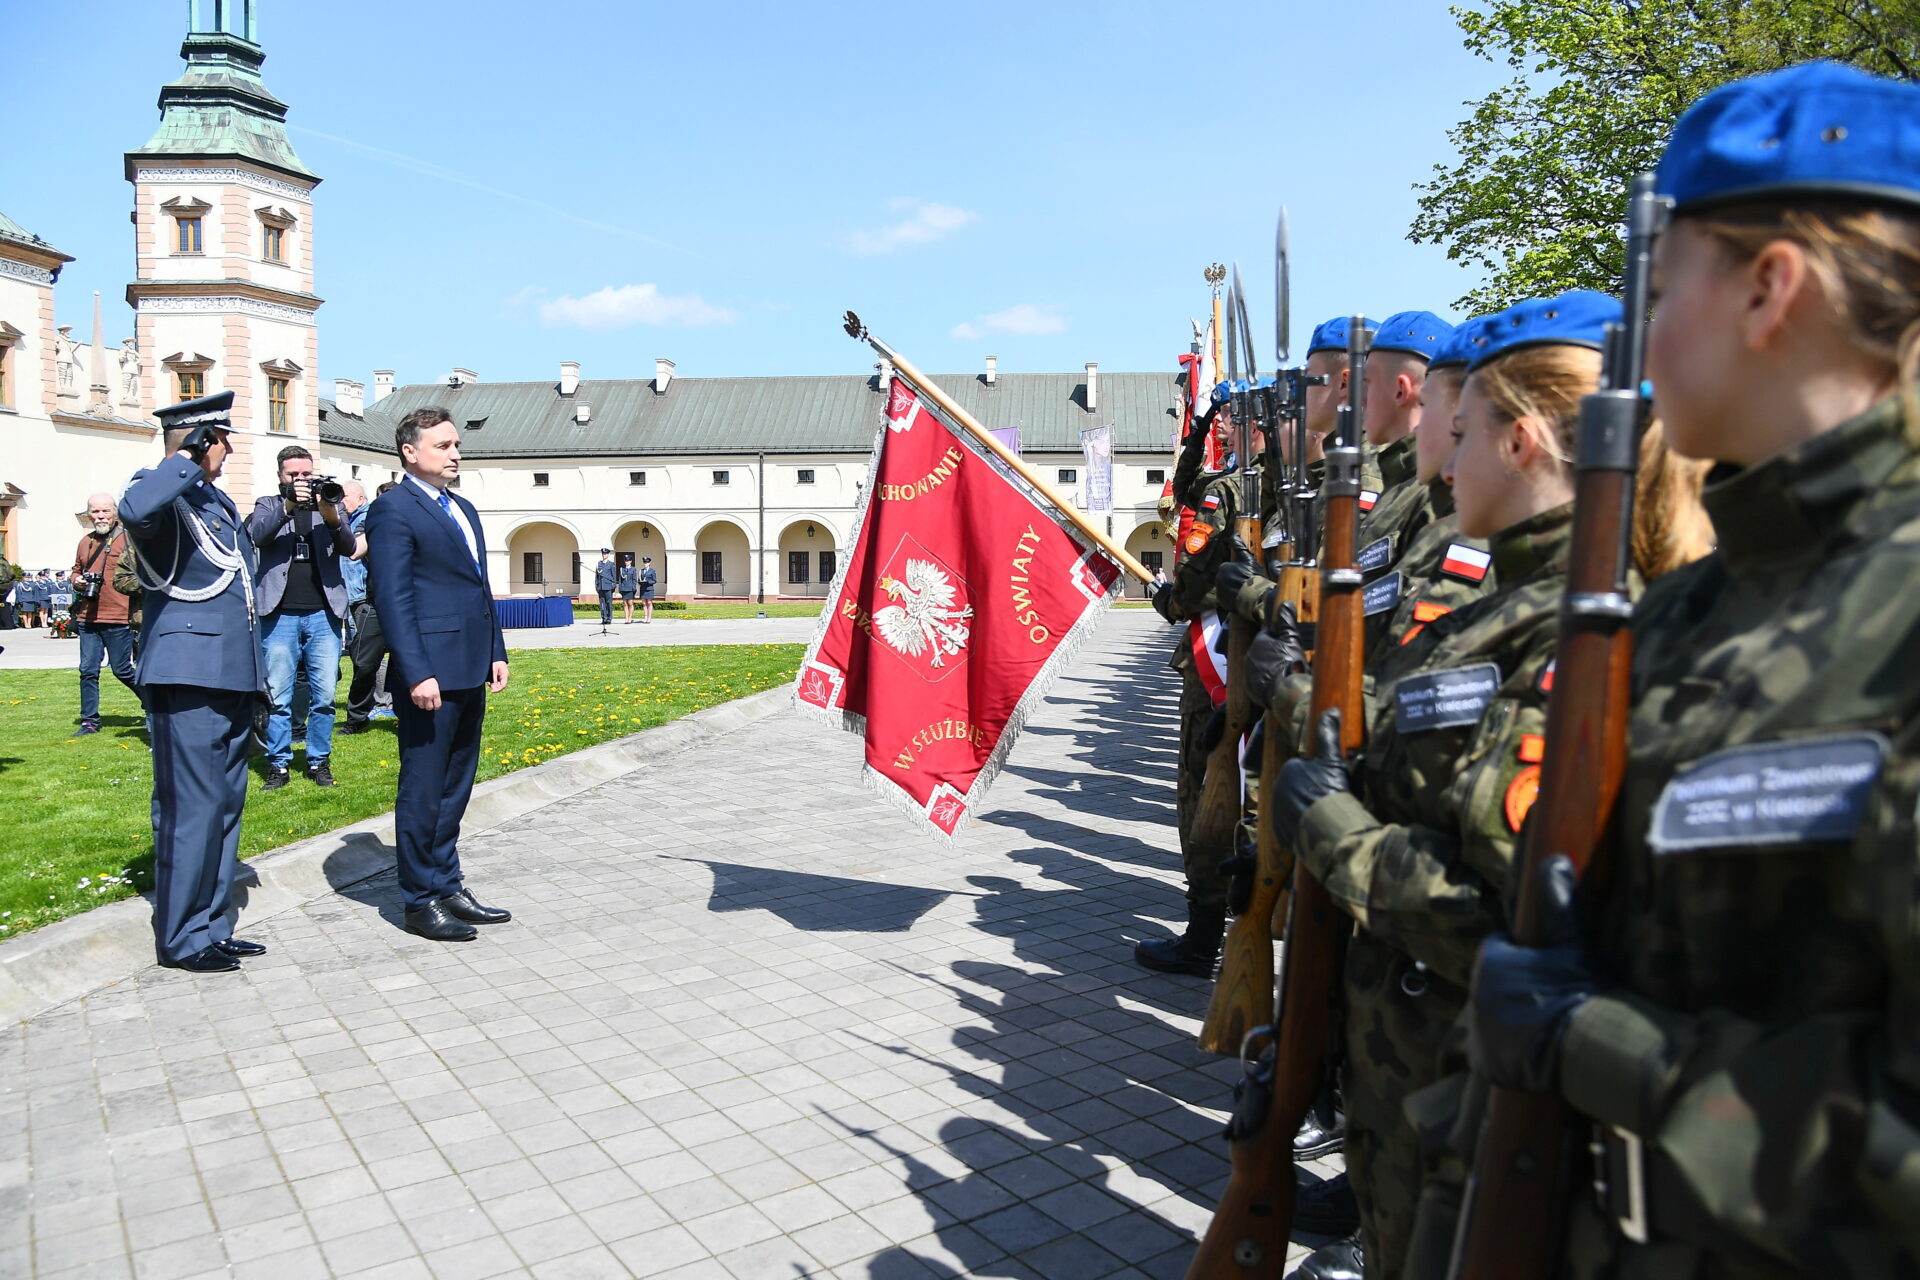 Minister of Justice honors exemplary service of Prison Officers in Kielce with Flag Presentation Ceremony